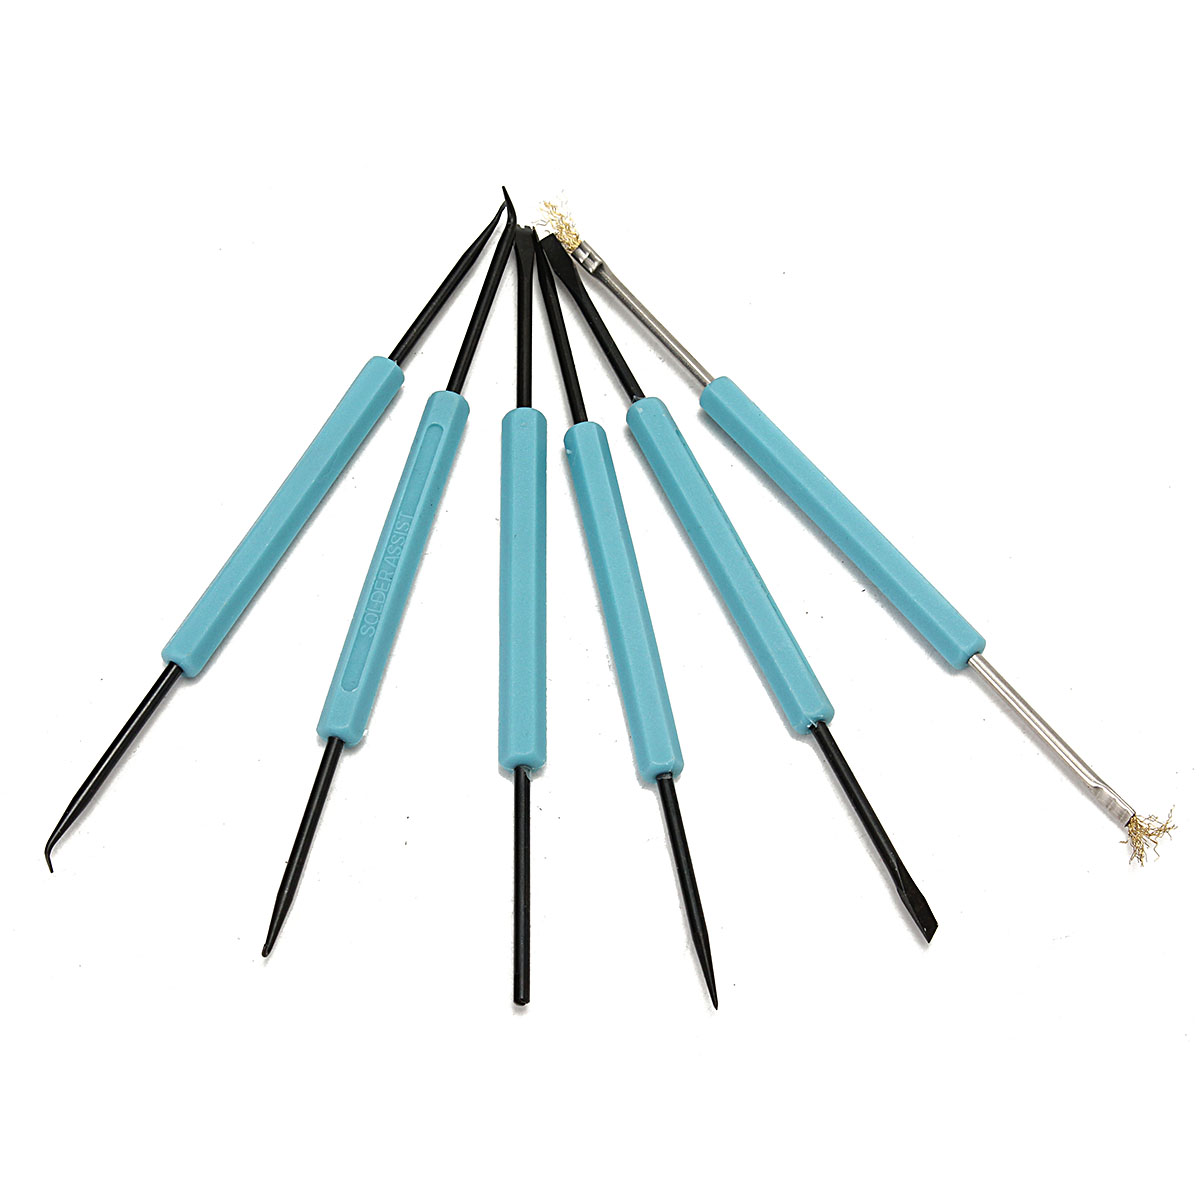 17in1-Electric-Soldering-Tools-Kit-Set-Iron-Stand-Desoldering-Pump-30W-110V-1300343-5